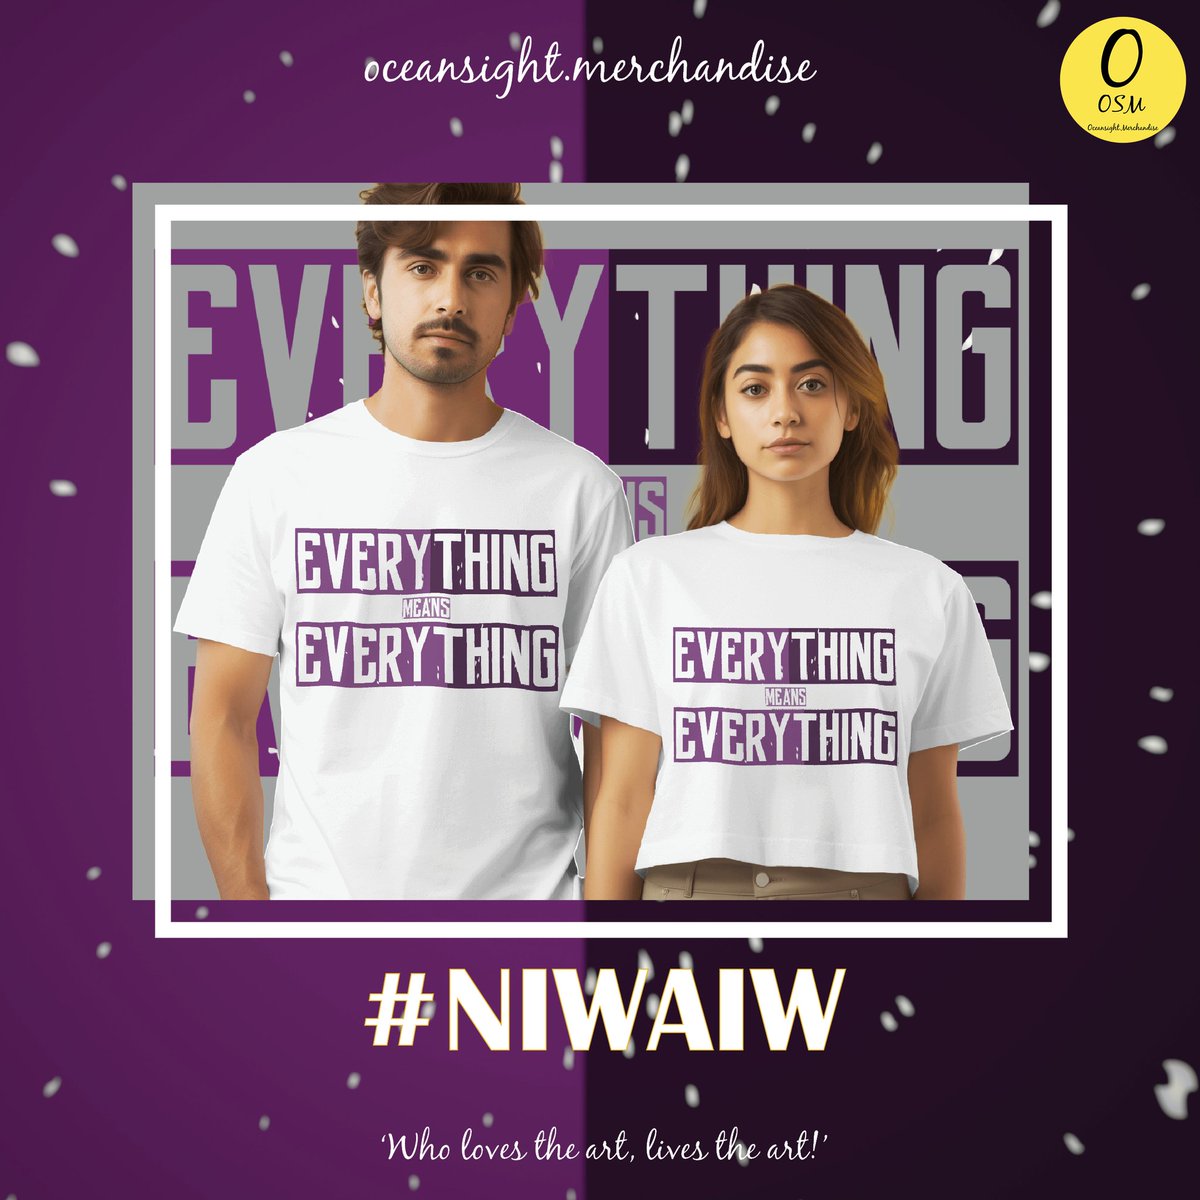 Bringing a #newcollection #NIWAIW inspired by #NowIWanderAsIWonderByOceanSingh 
Explore the beliefs of #Everything #EverythingMeansEverything 
#SHOPNOW ‼️
Visit Site - oceansinghthepoetess.blinkstore.in/shop

Store @os_merchandise